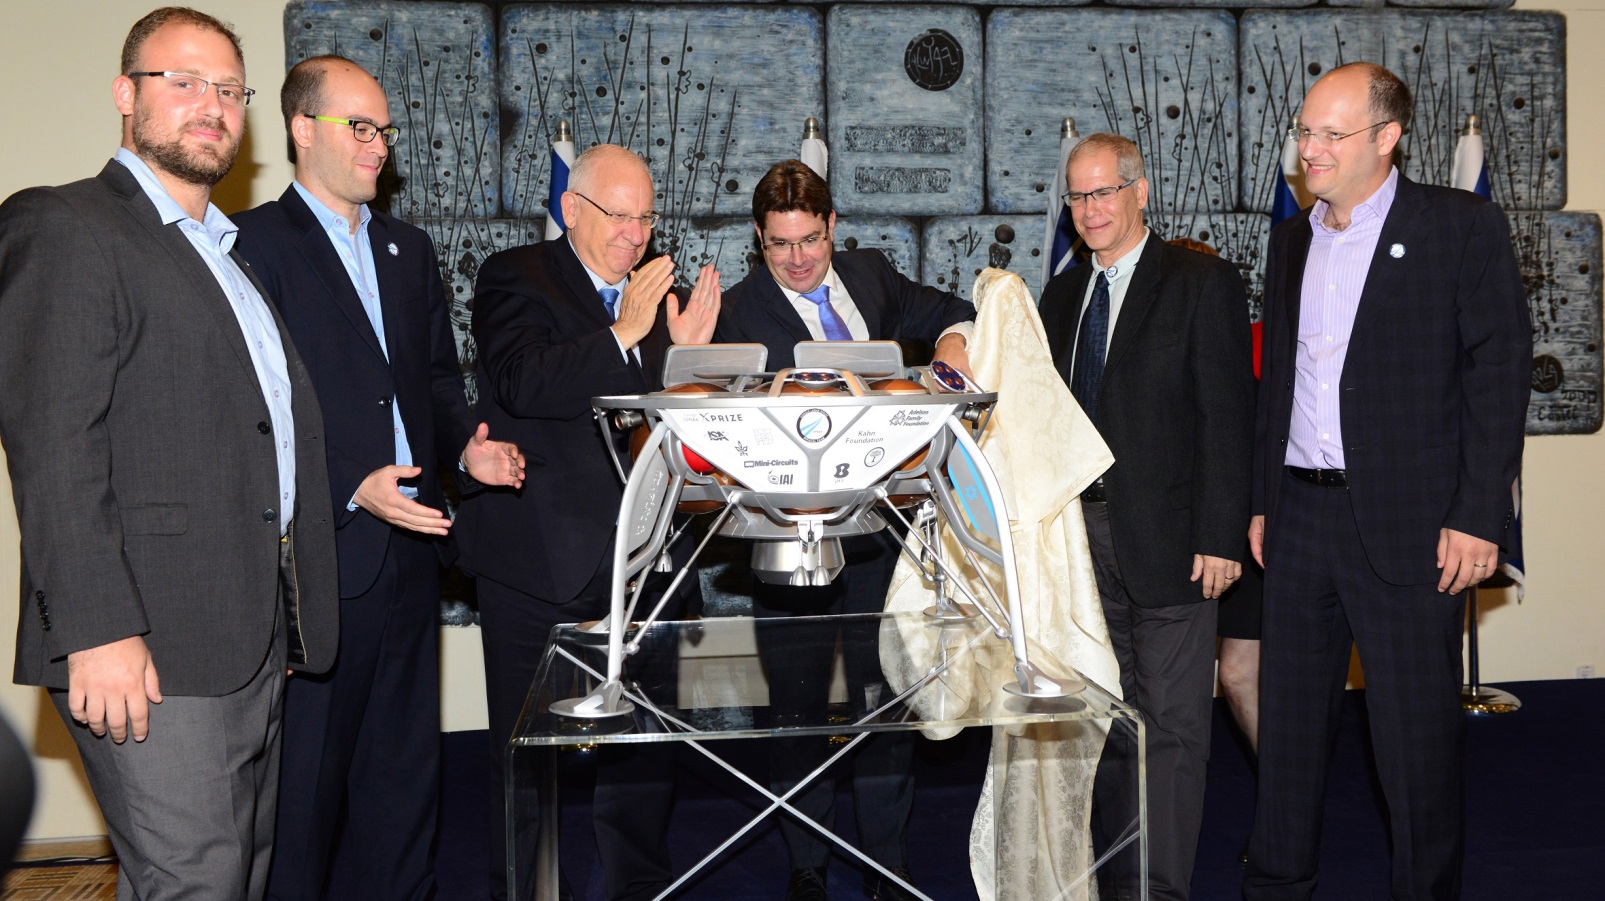 Cap: A prototype of SpaceIL’s robotic spacecraft being unveiled for Israeli President Reuven Rivlin. Photo: courtesy